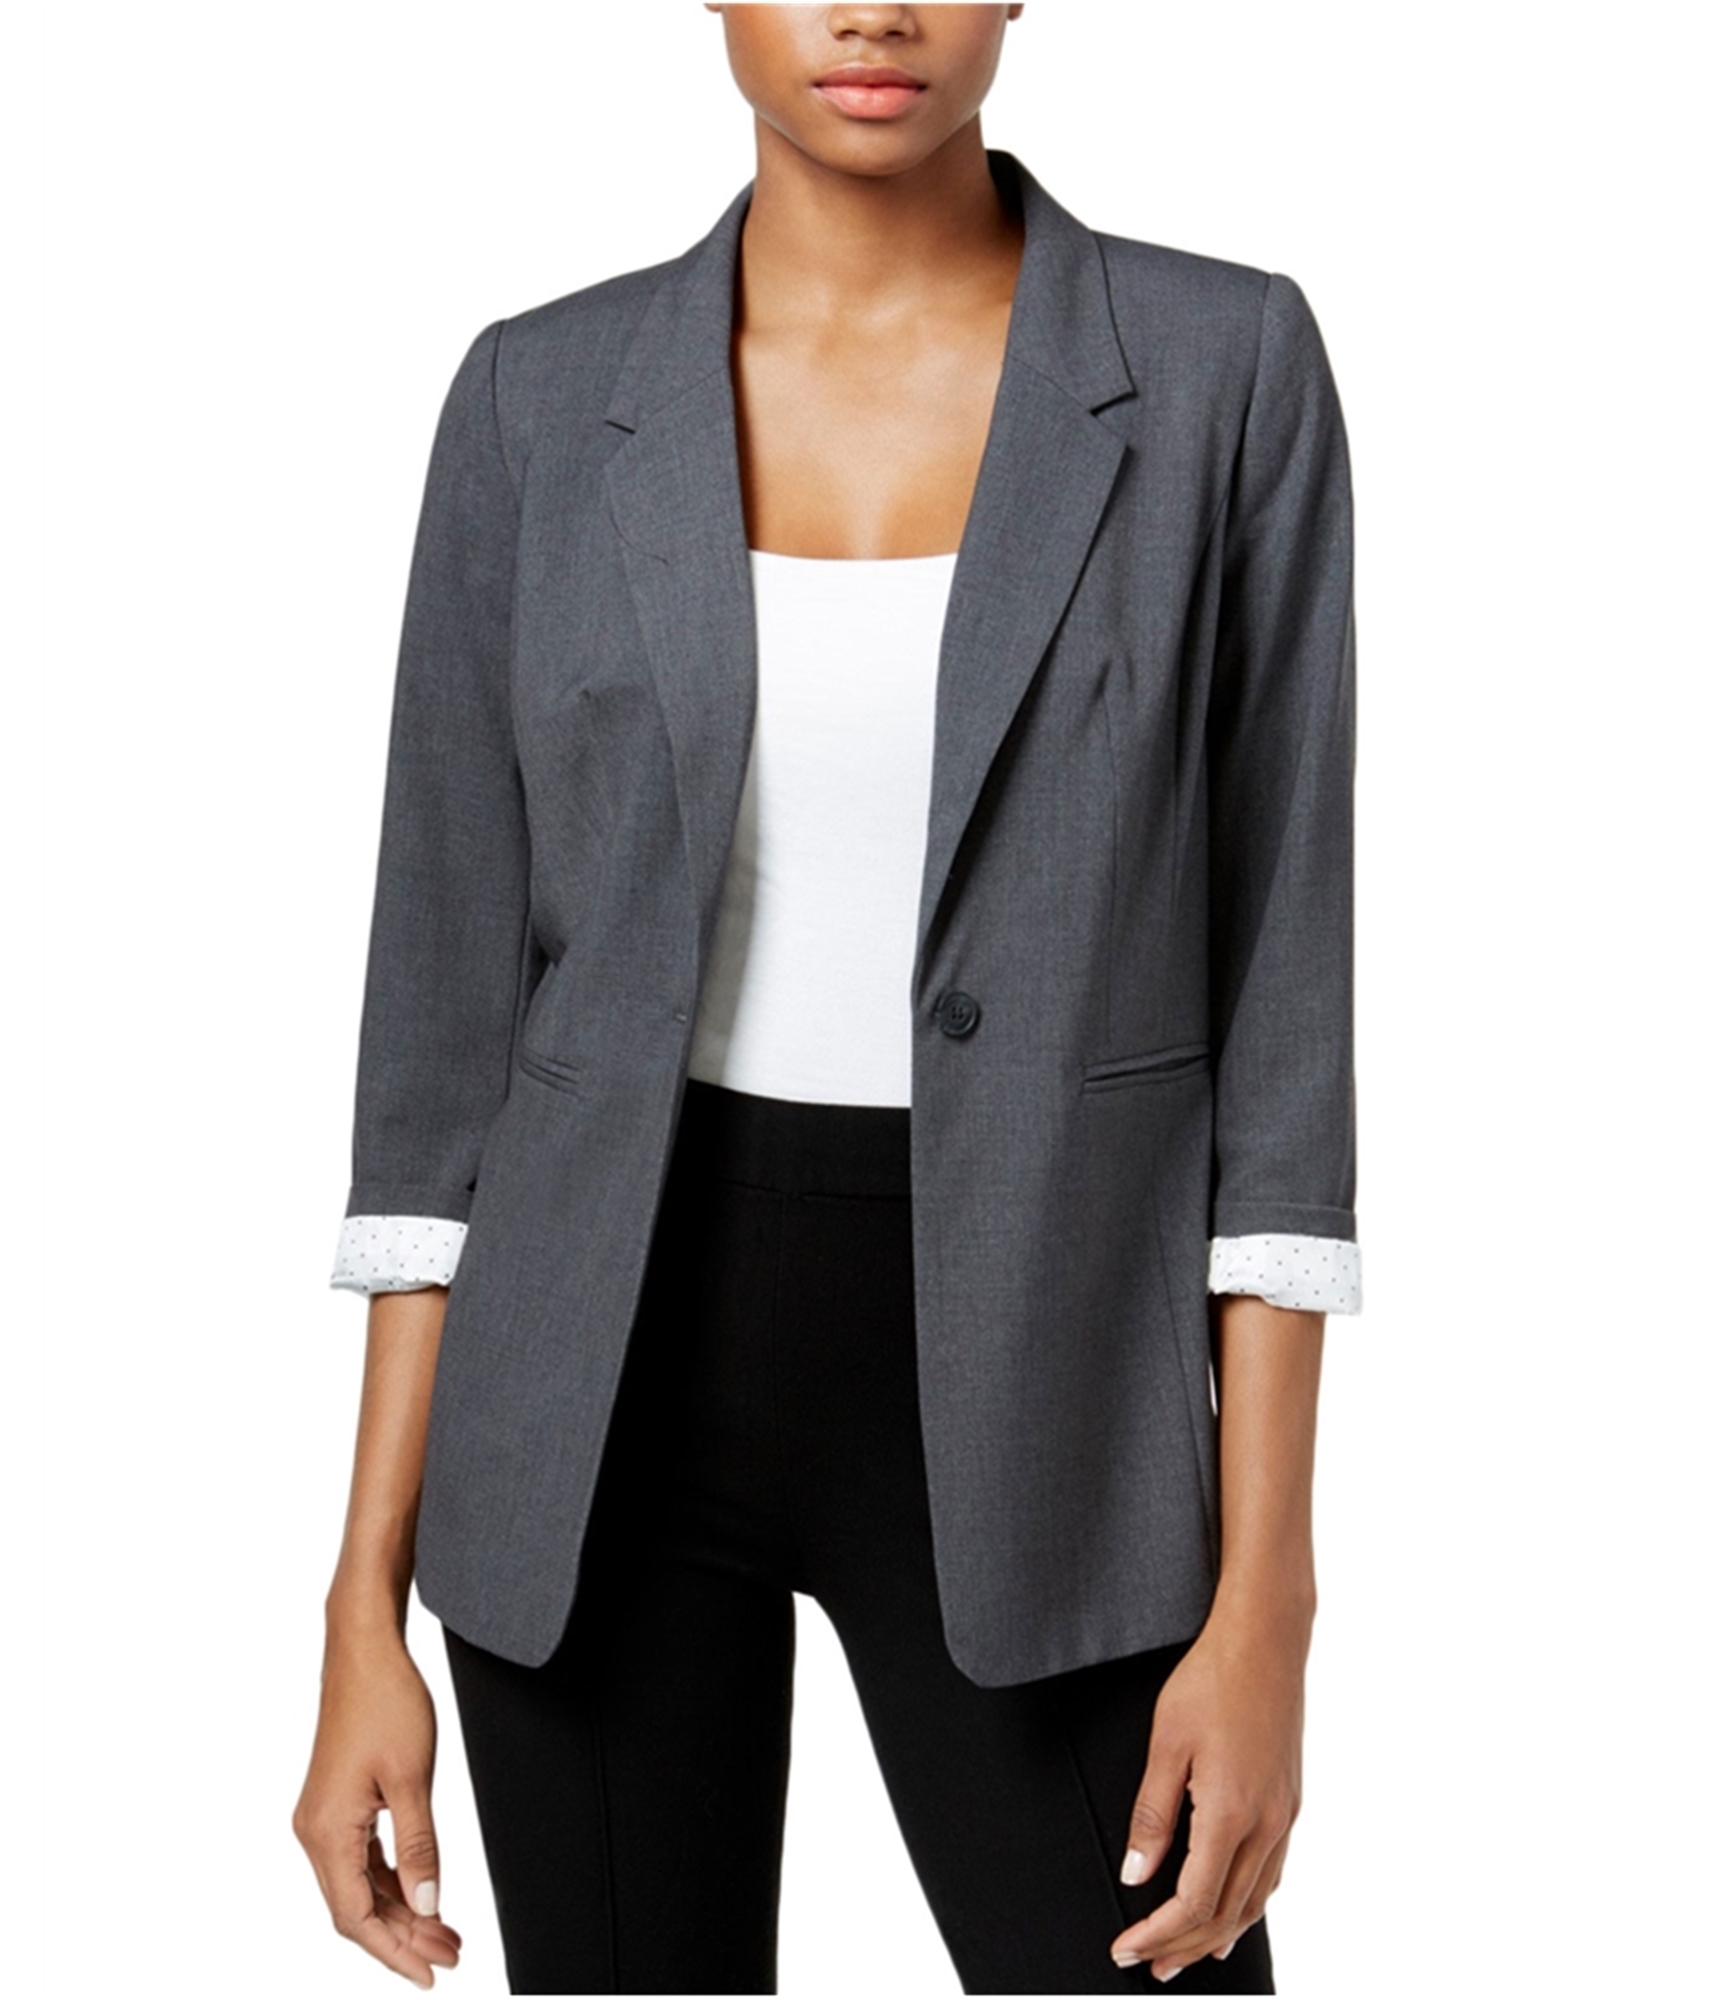 Kensie Womens Solid One Button Blazer Jacket | TagsWeekly.com